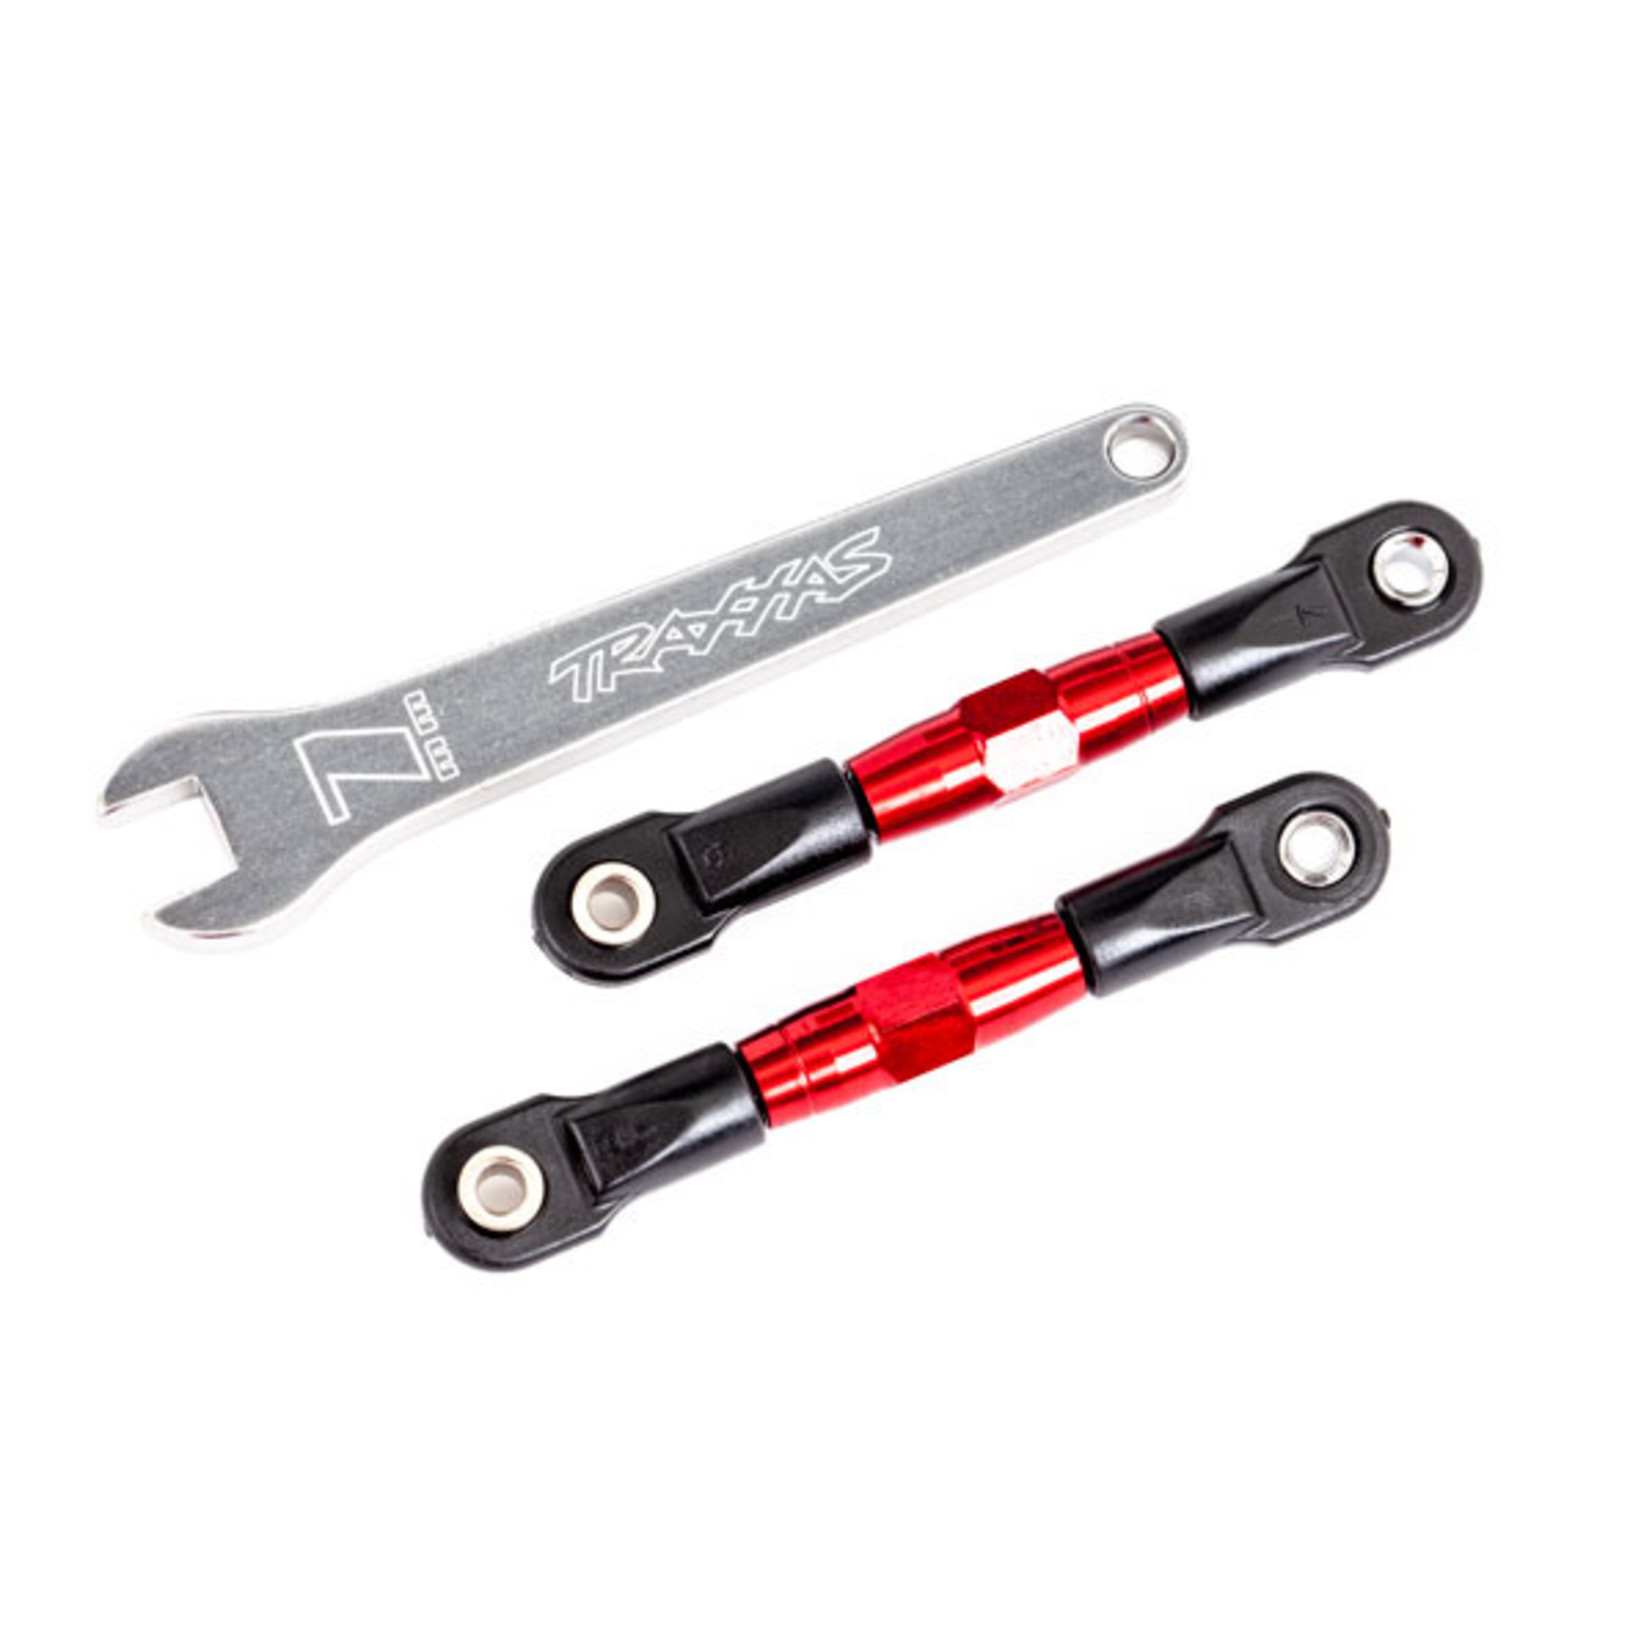 Traxxas 2443R - Camber links, rear (TUBES red-anodized, 7075-T6